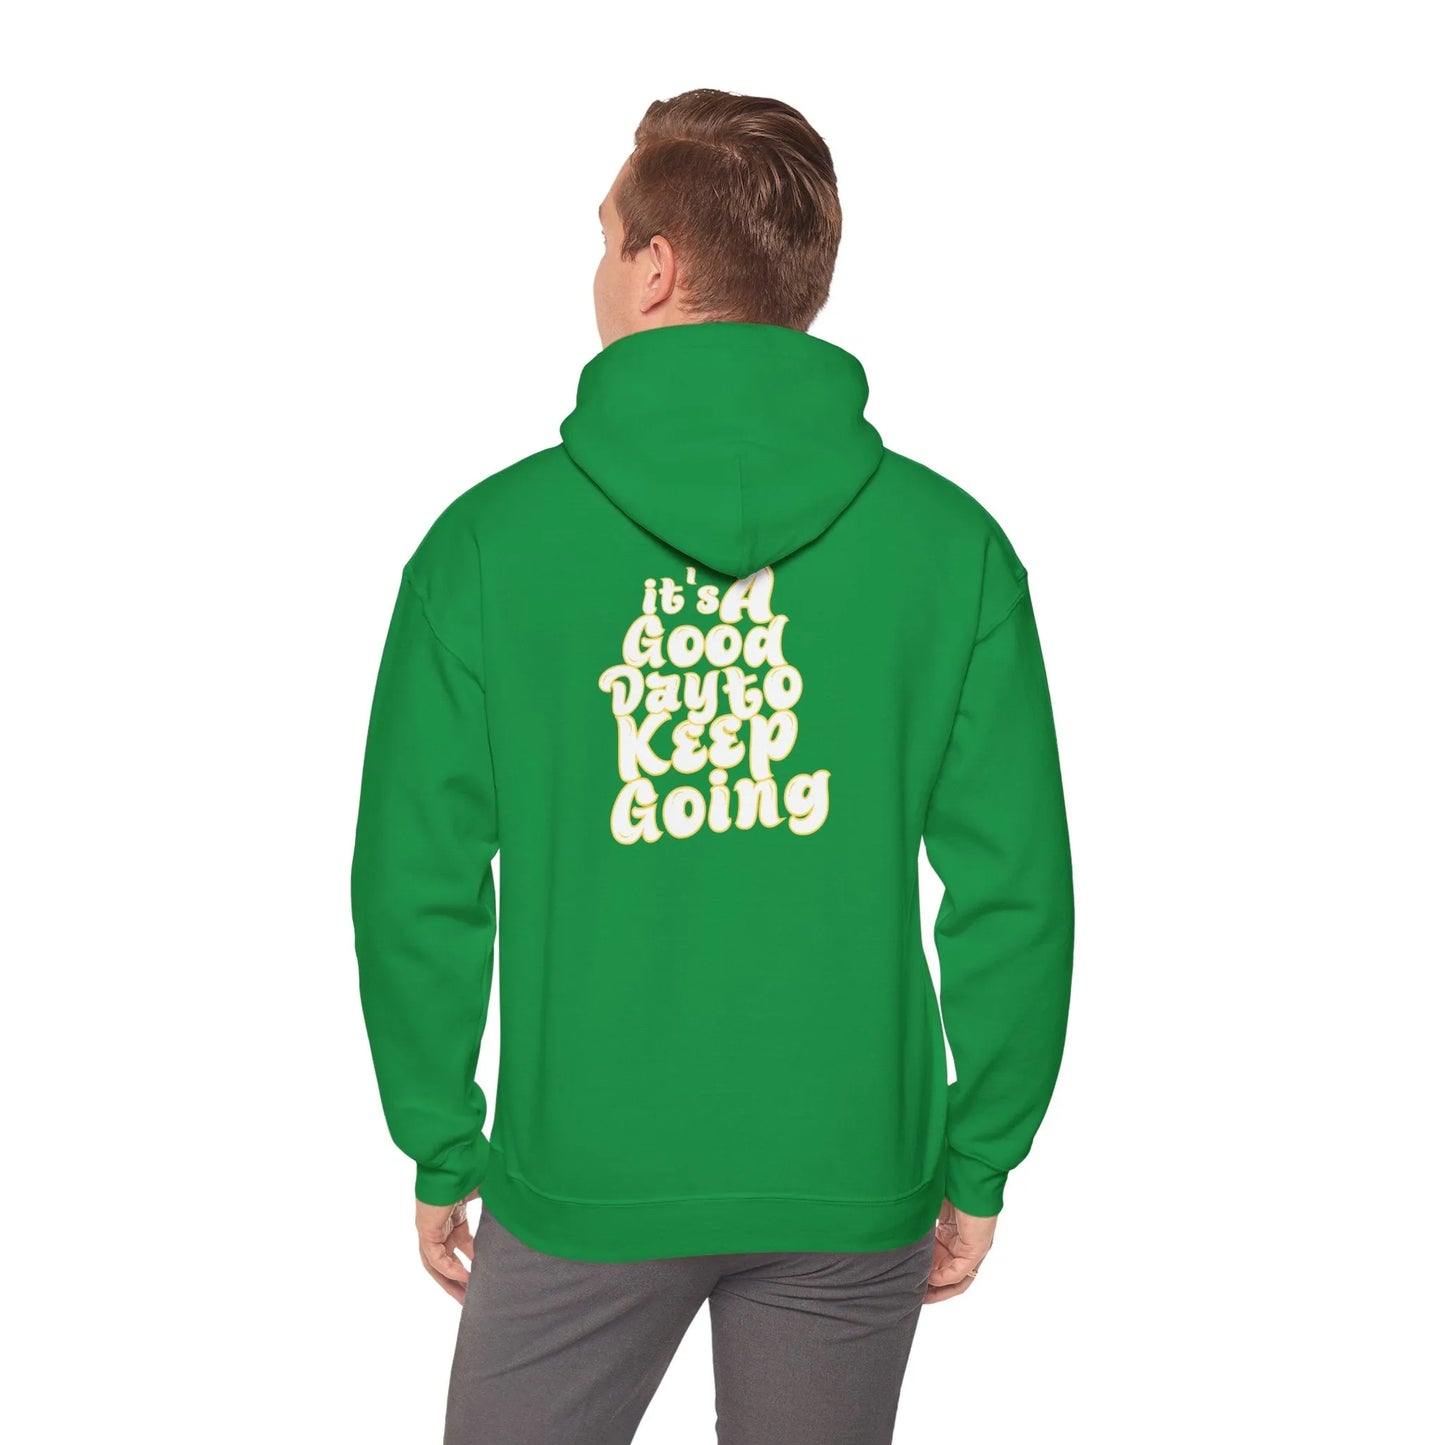 It's A Good Day To Keep Going Hoodie Yellow Green Model Back